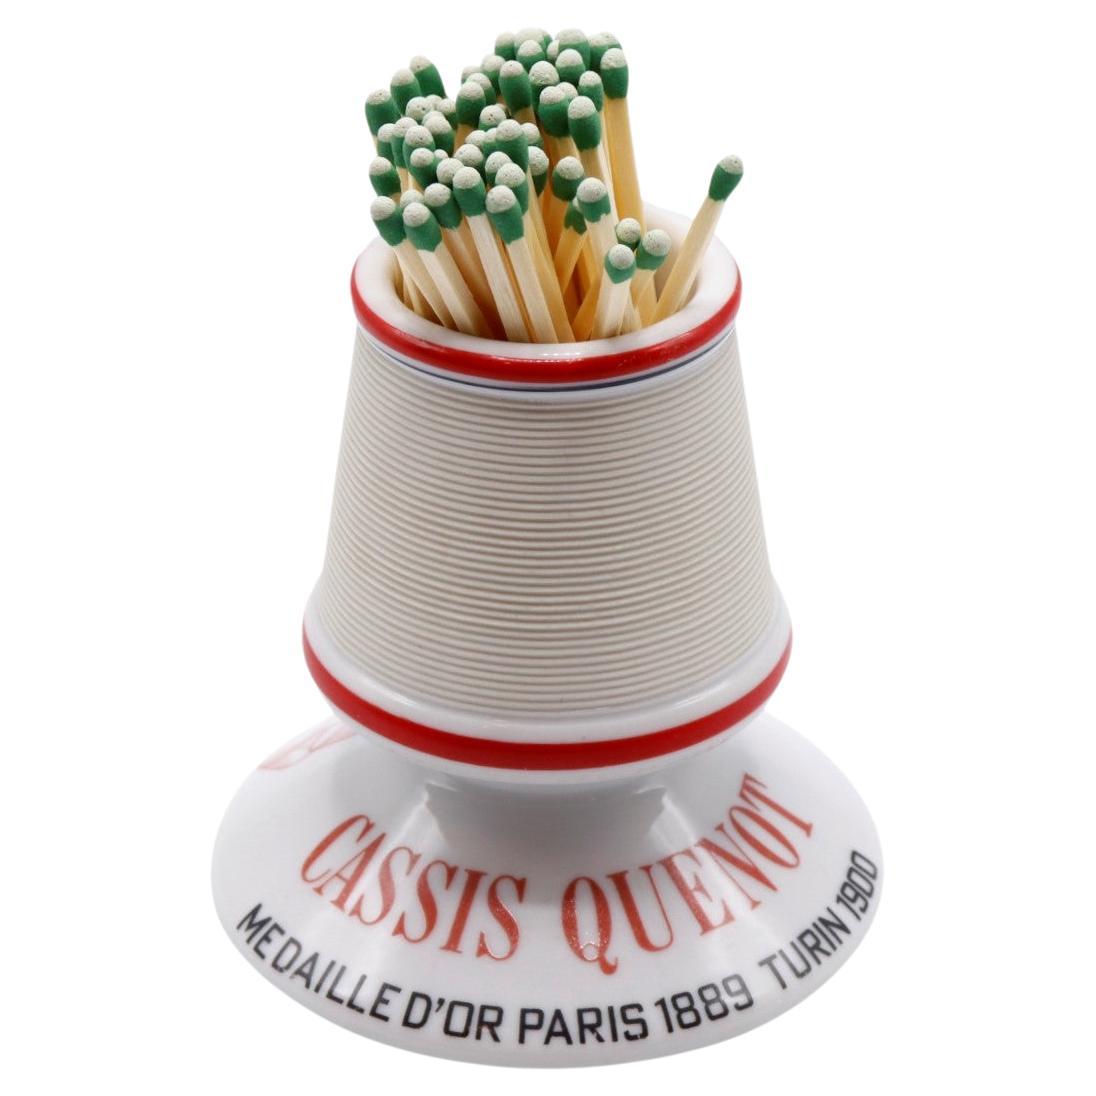 Cassis Quenot French Ceramic Match Striker For Sale